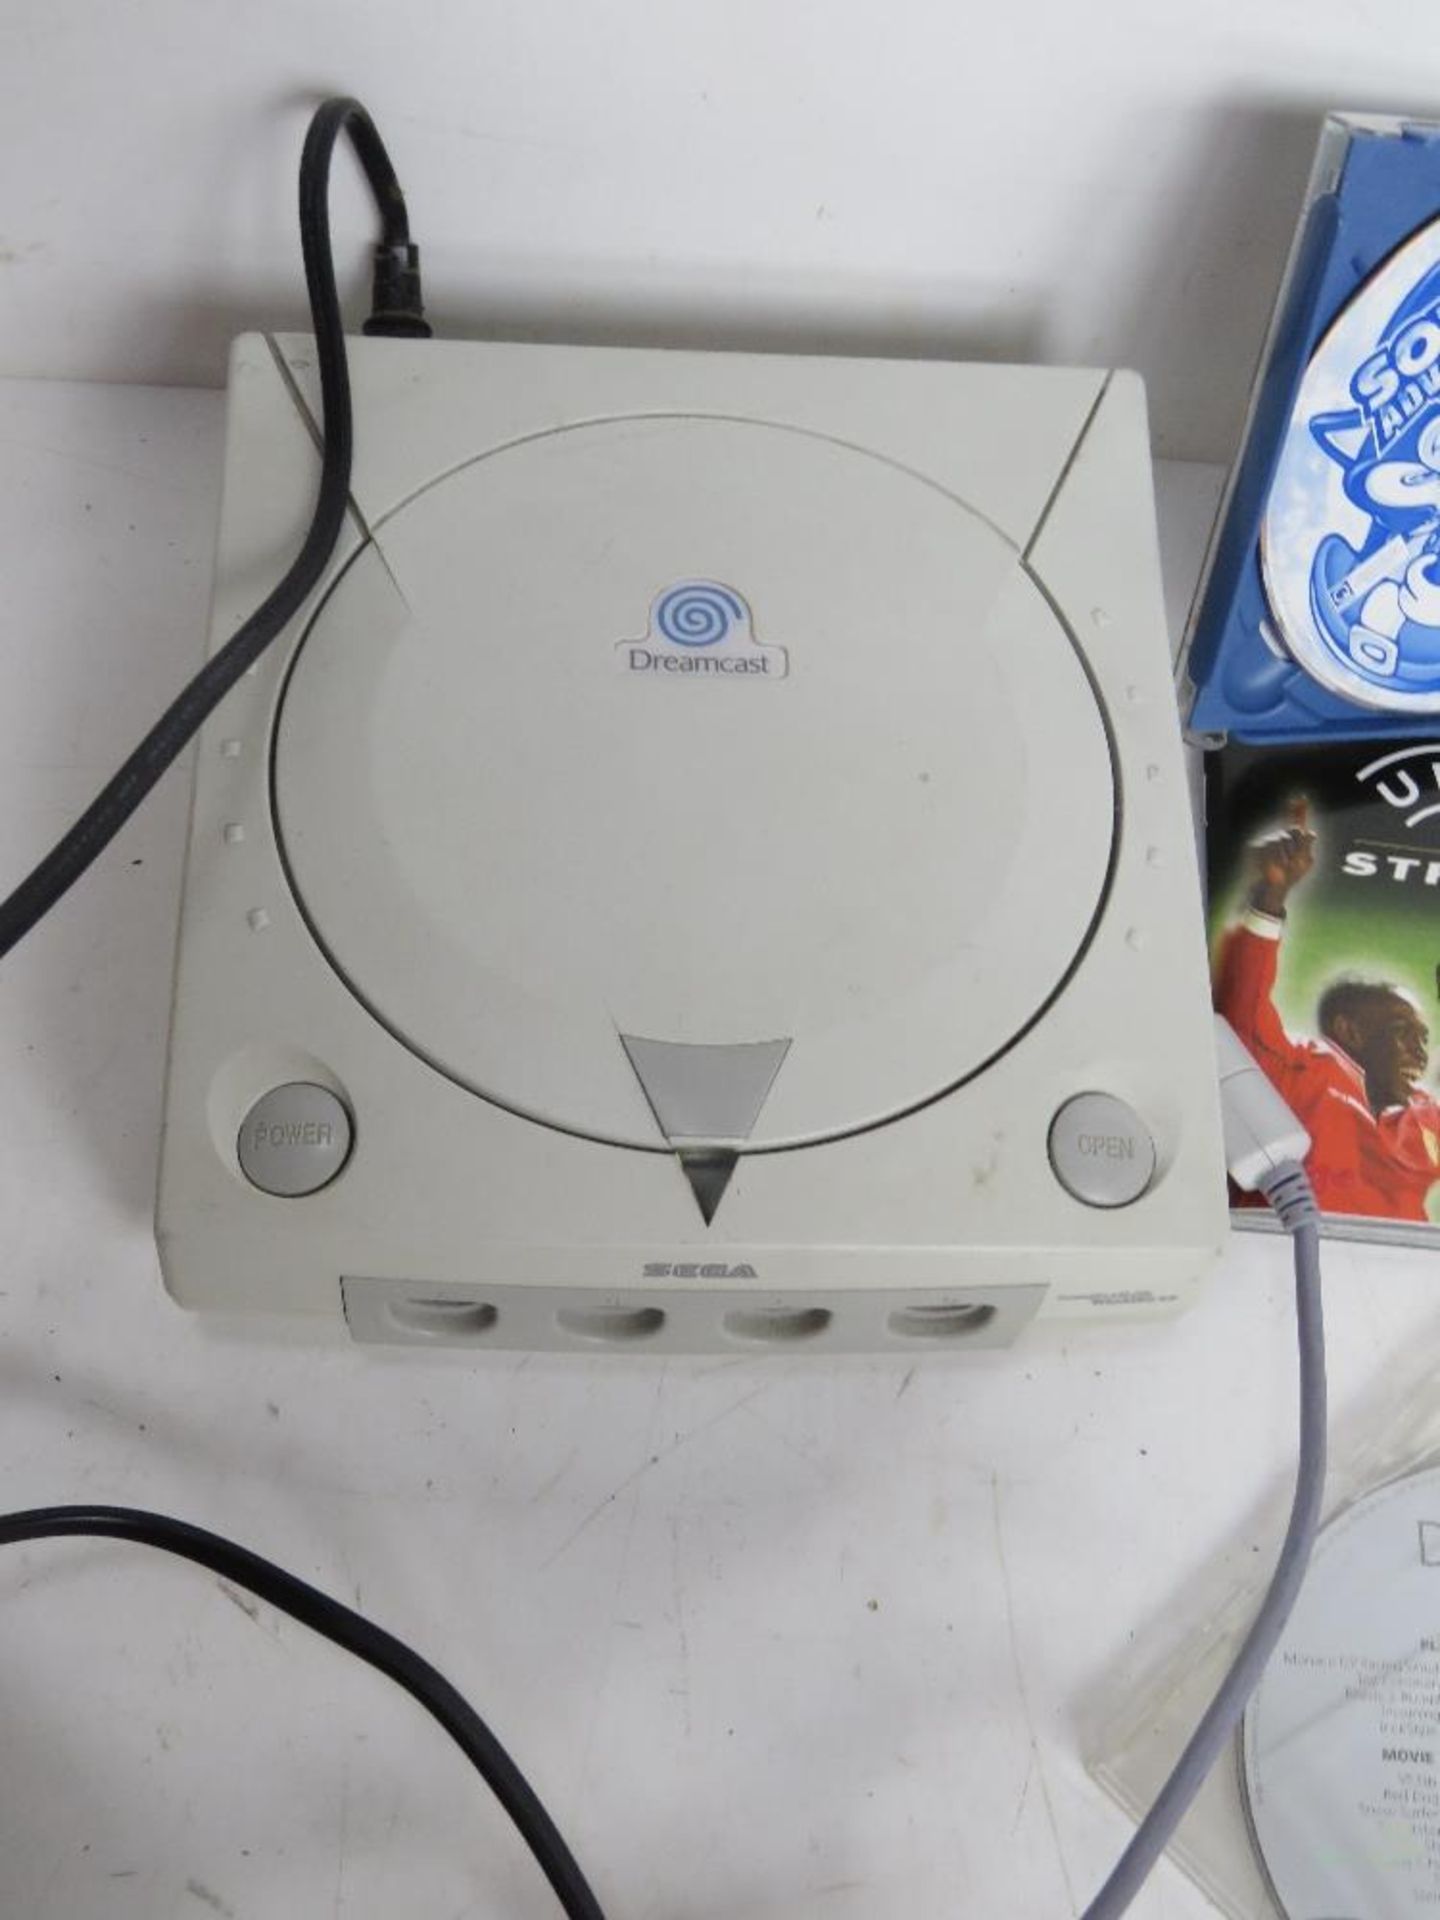 A Dreamcast console with controller and games. - Image 2 of 2